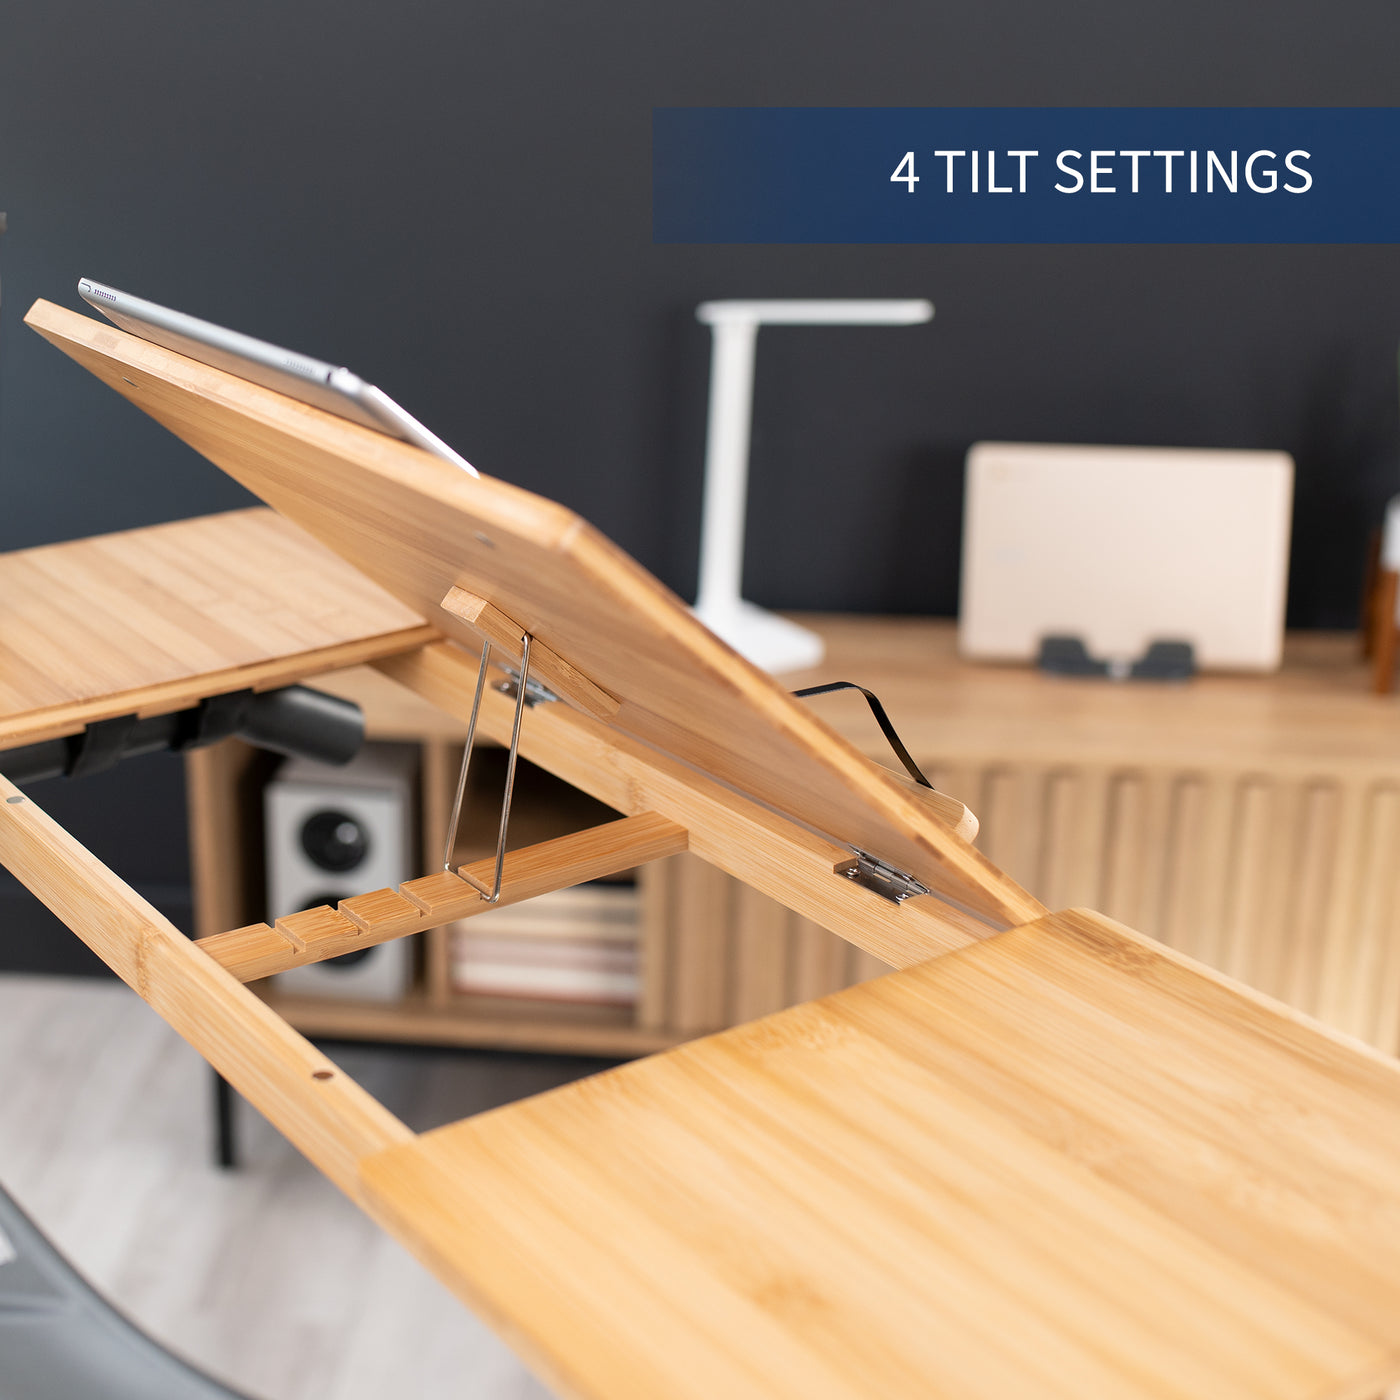 Bamboo tilting laptop desk for treadmill with heavy duty side shelves and easy installation.